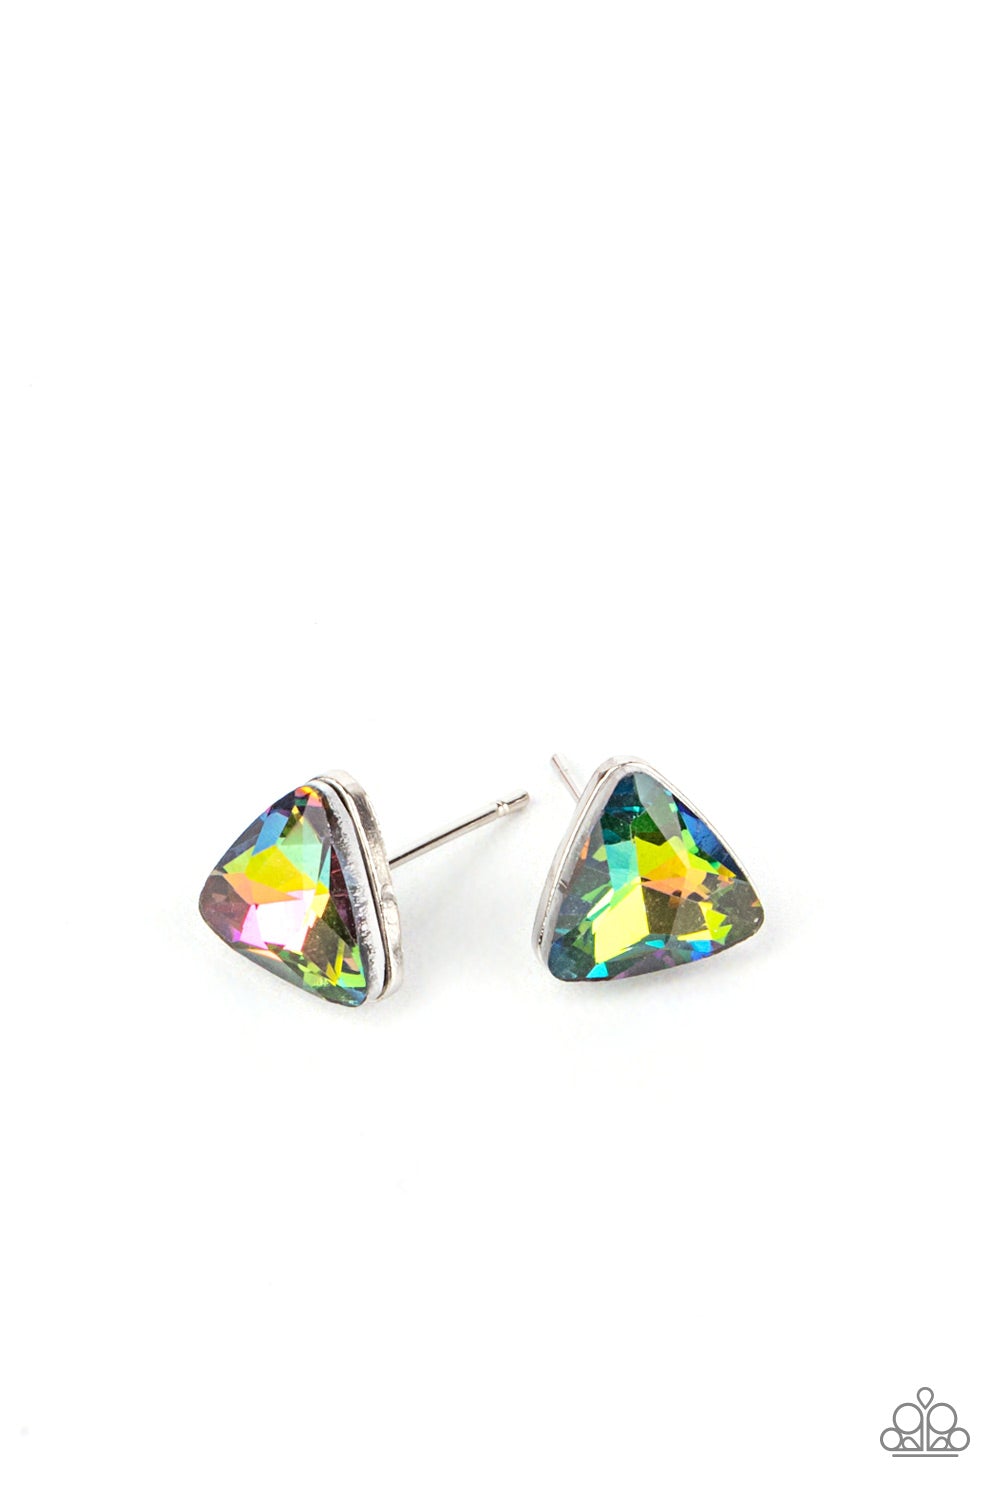 Paparazzi Accessories - MULTI COLOR OIL SPILL #SS9 - Starlet Shimmer Earrings